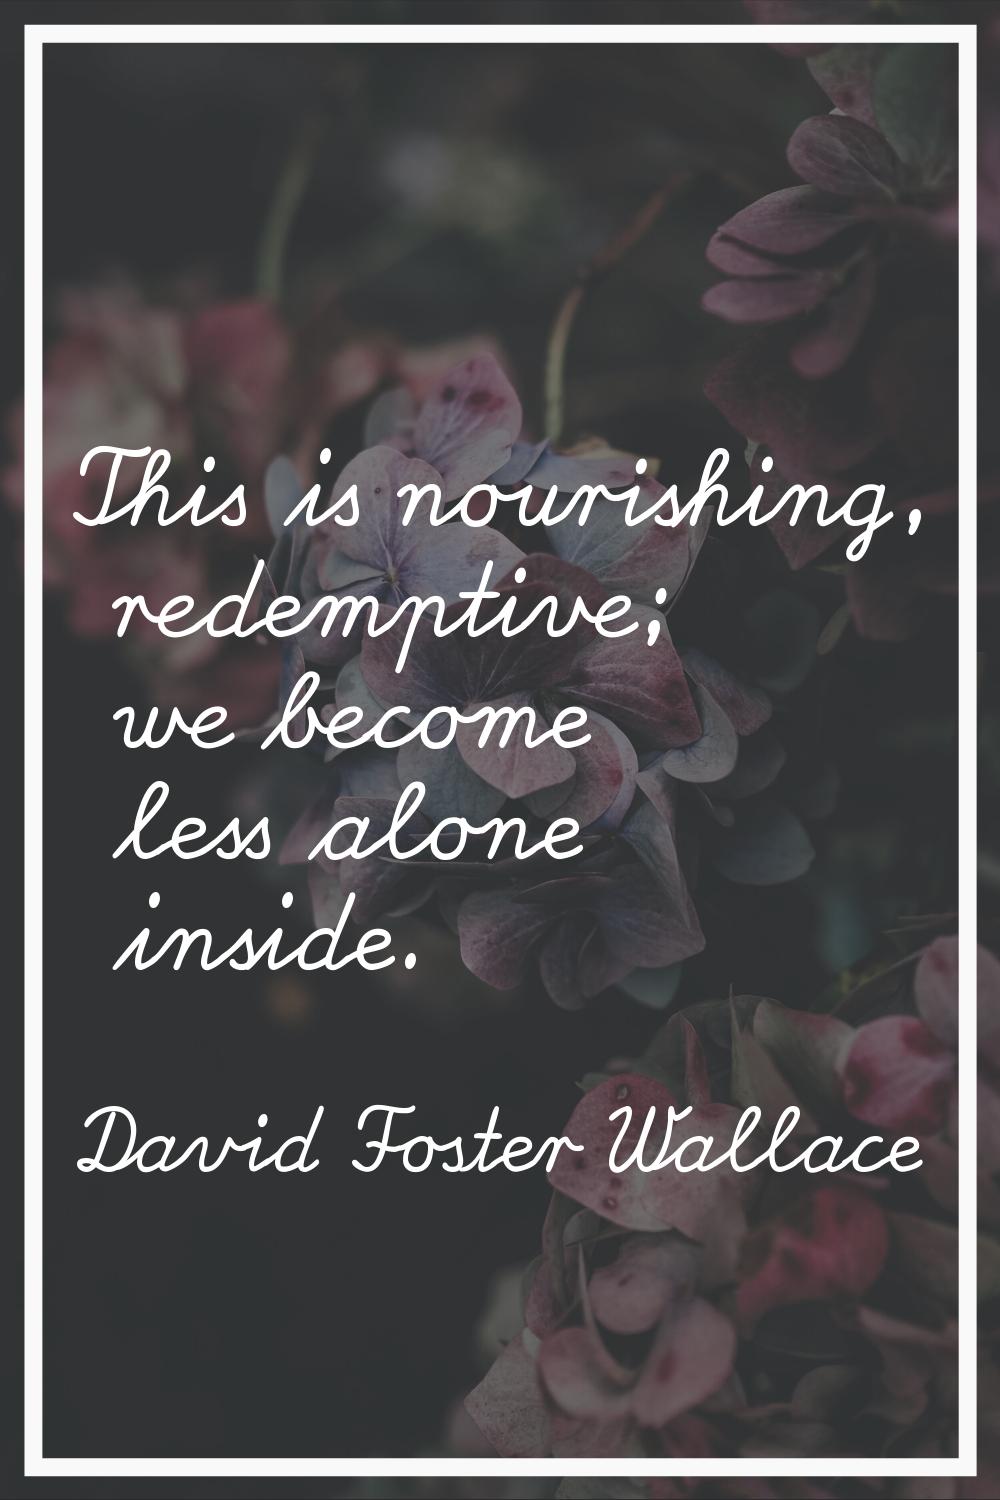 This is nourishing, redemptive; we become less alone inside.